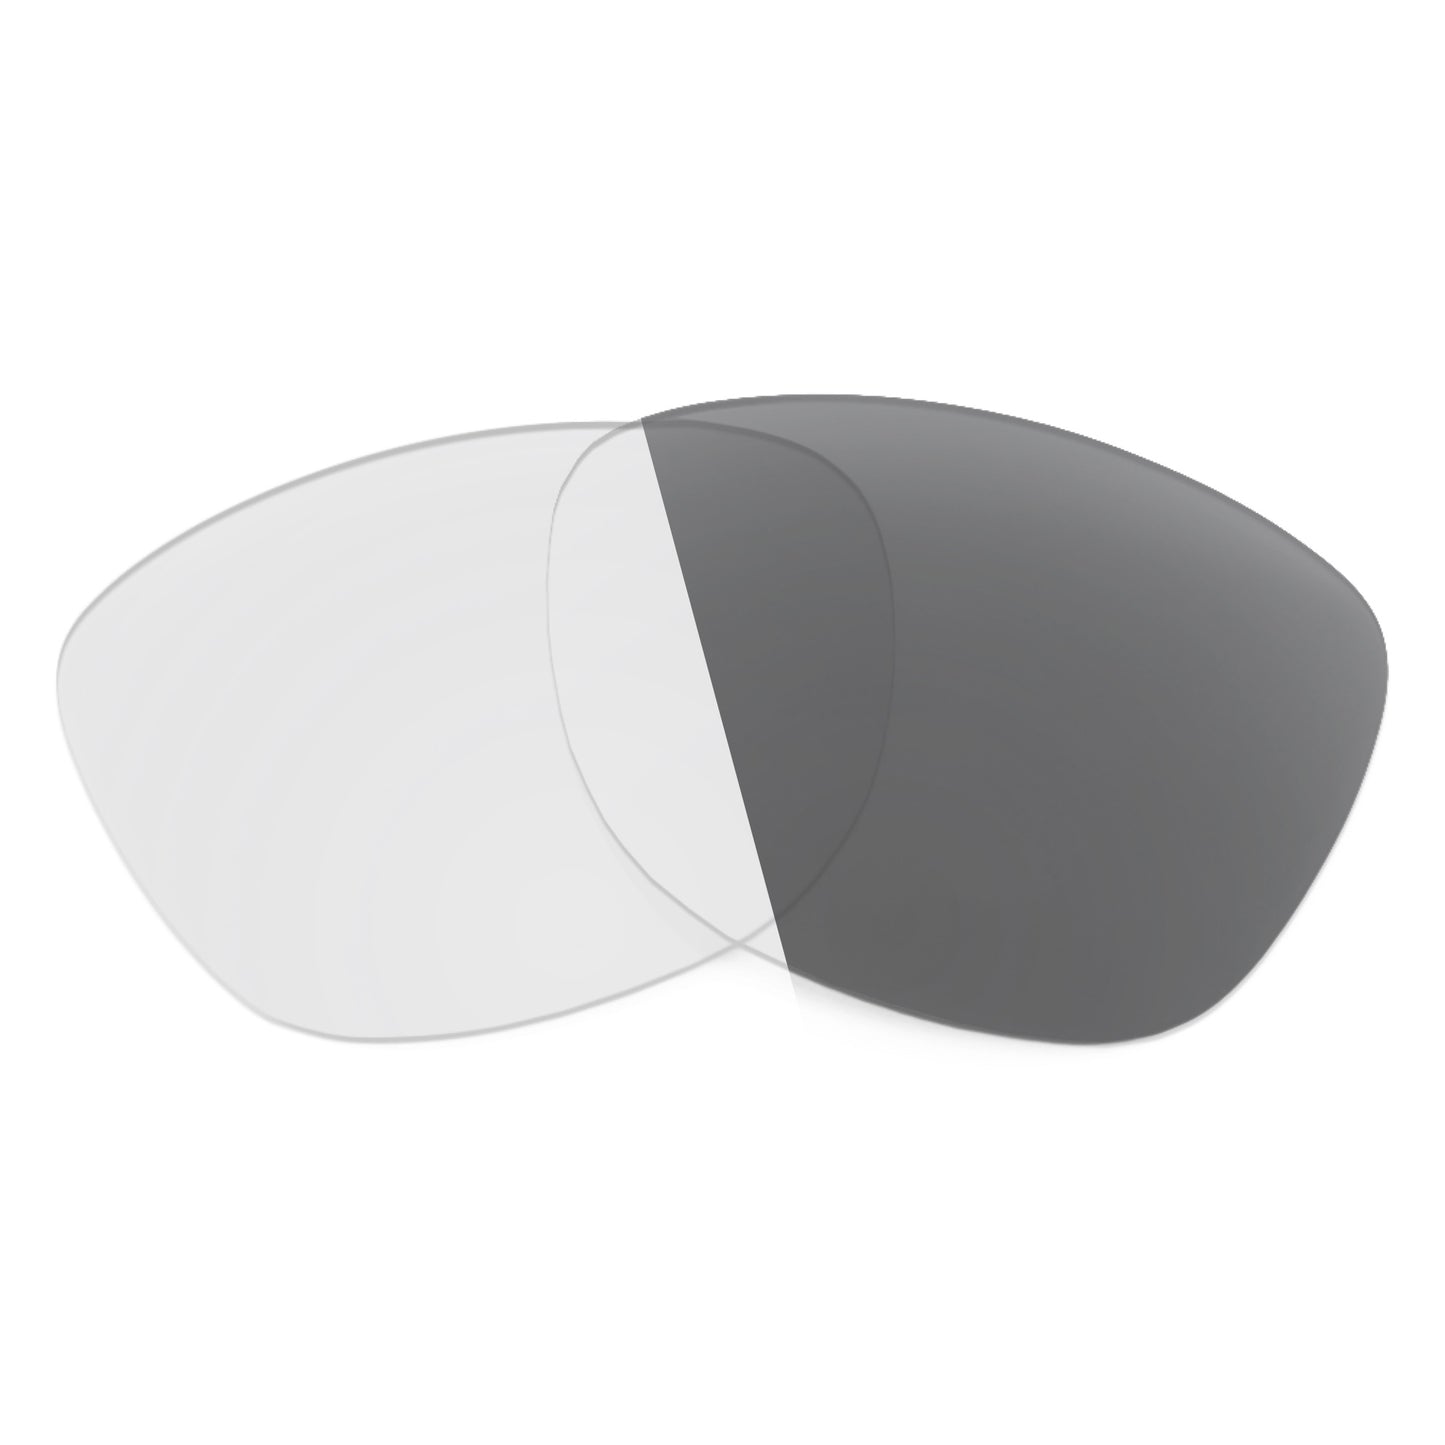 Revant Replacement Lenses for Ray-Ban RB4428